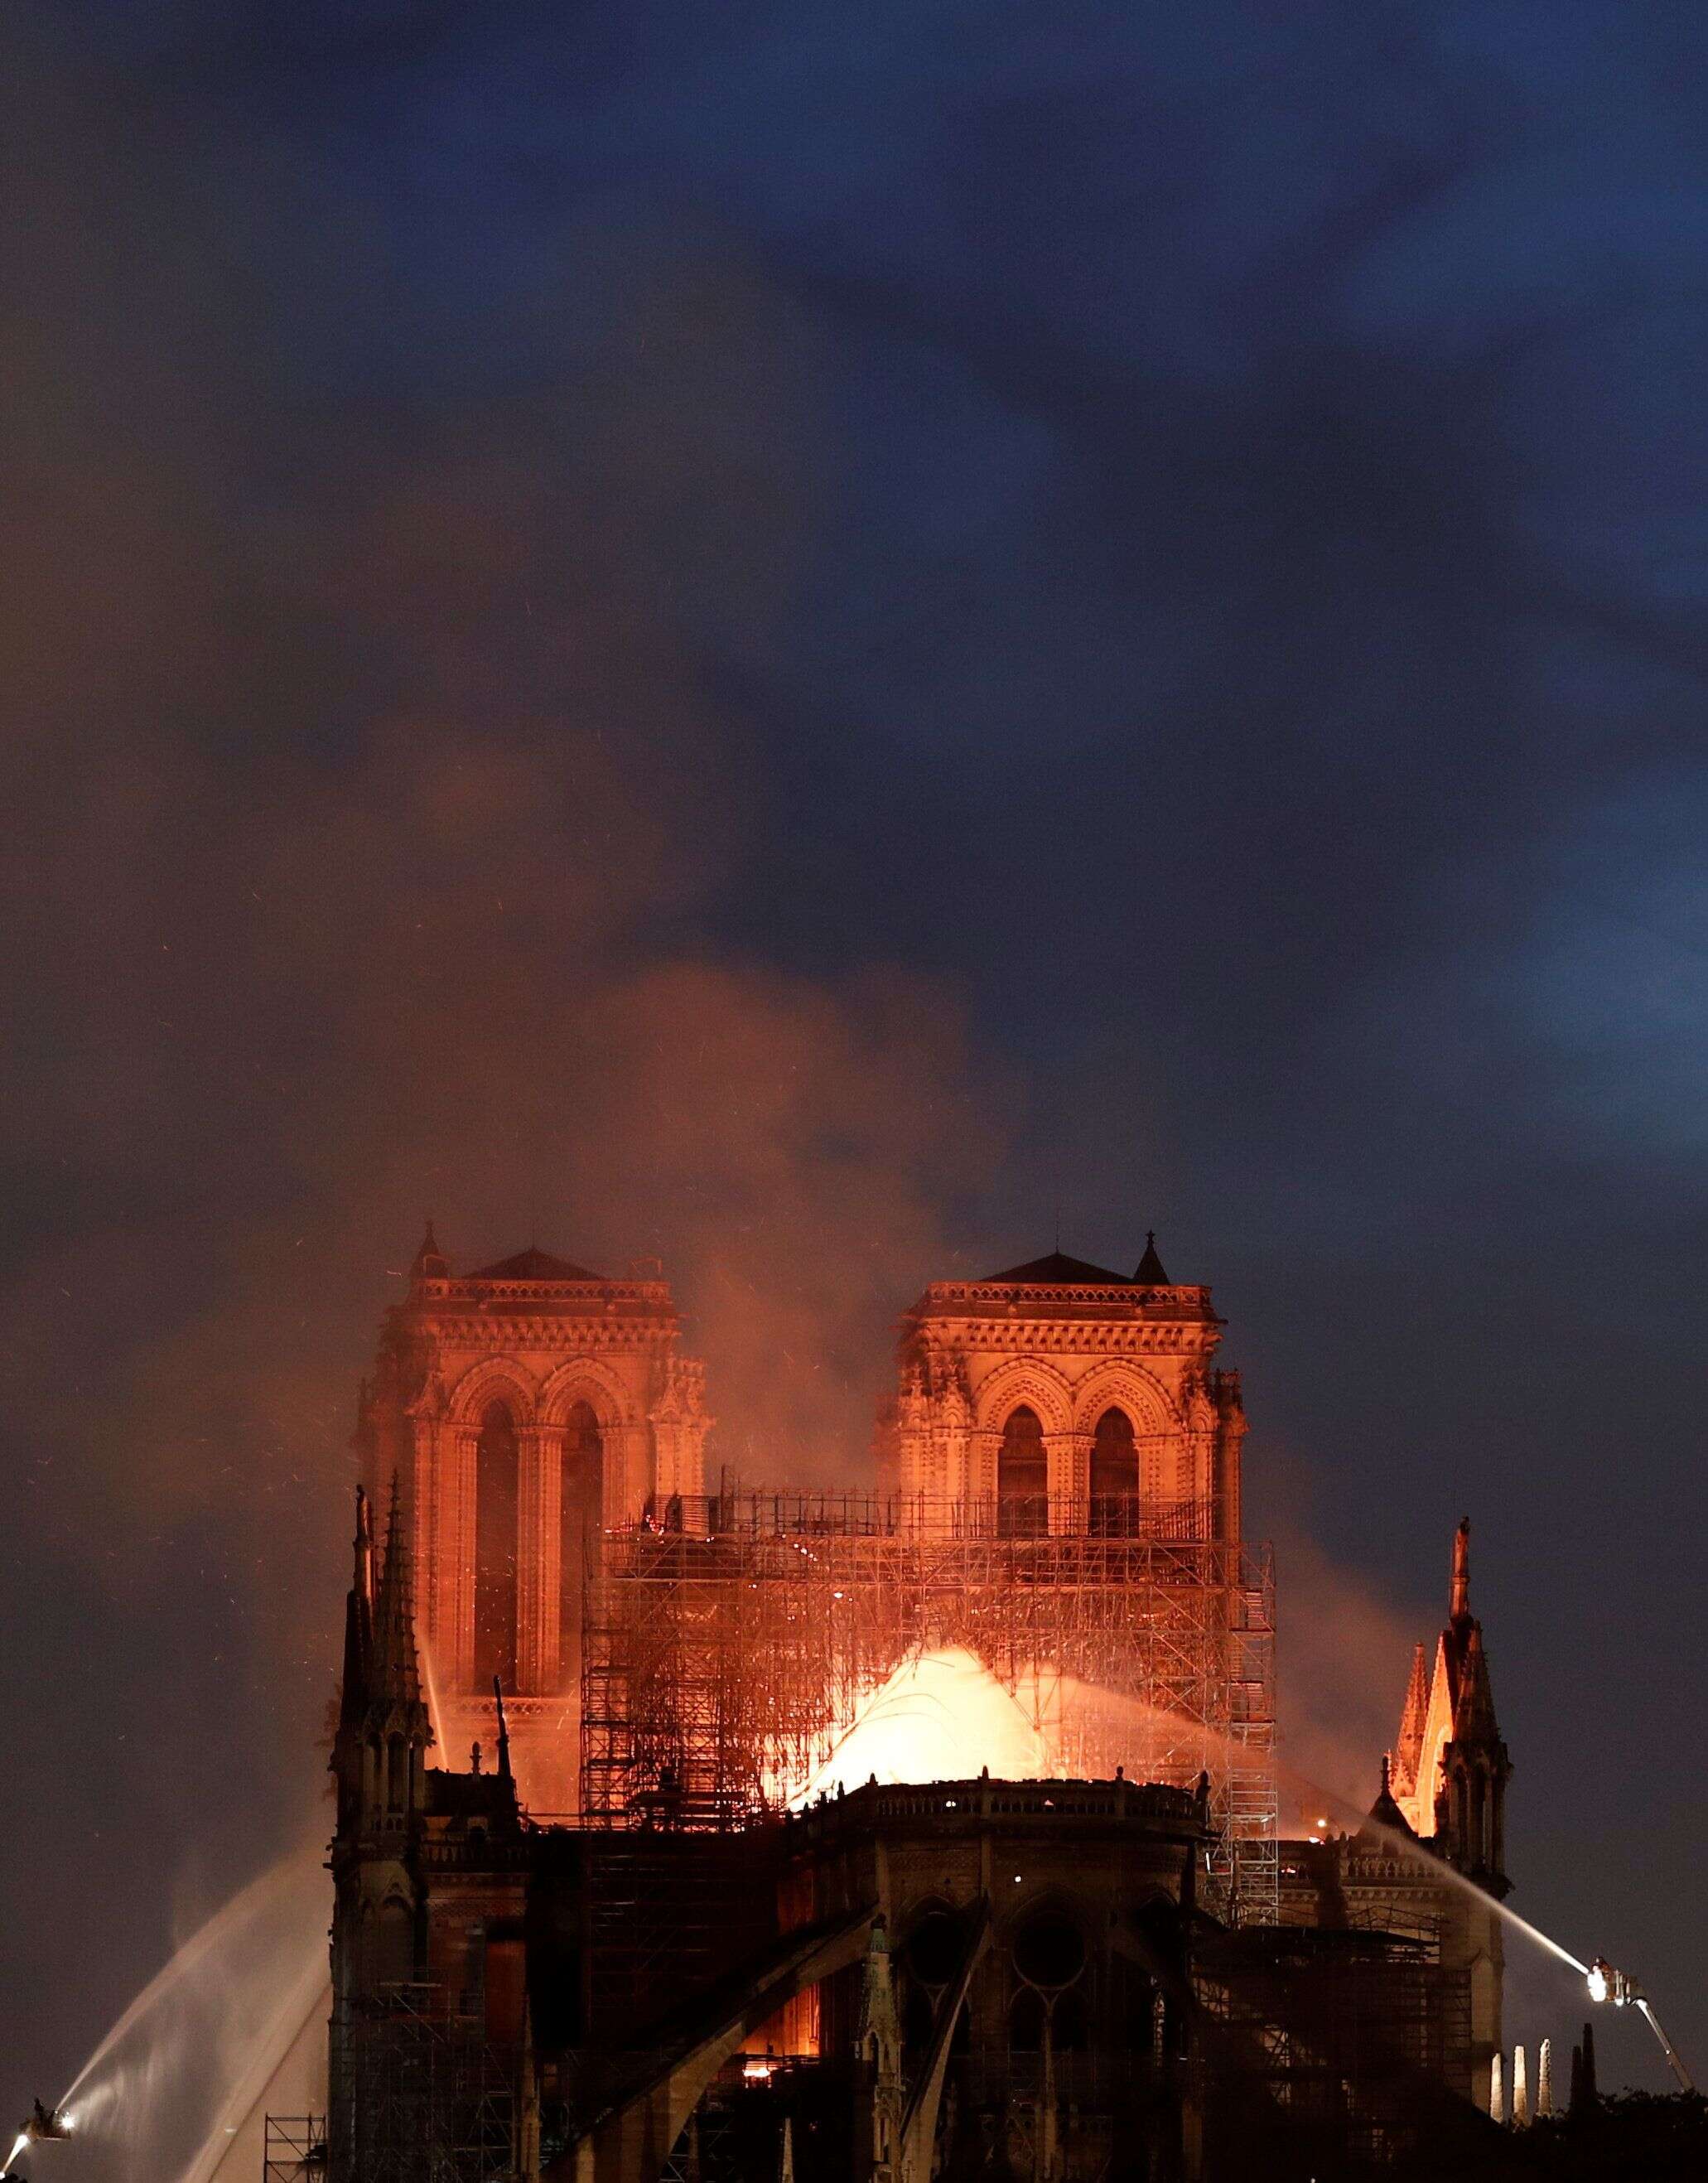 Firefighters douse flames from the burning Notre Dame Cathedral in Paris, France April 15, 2019. REUTERS/Benoit Tessier